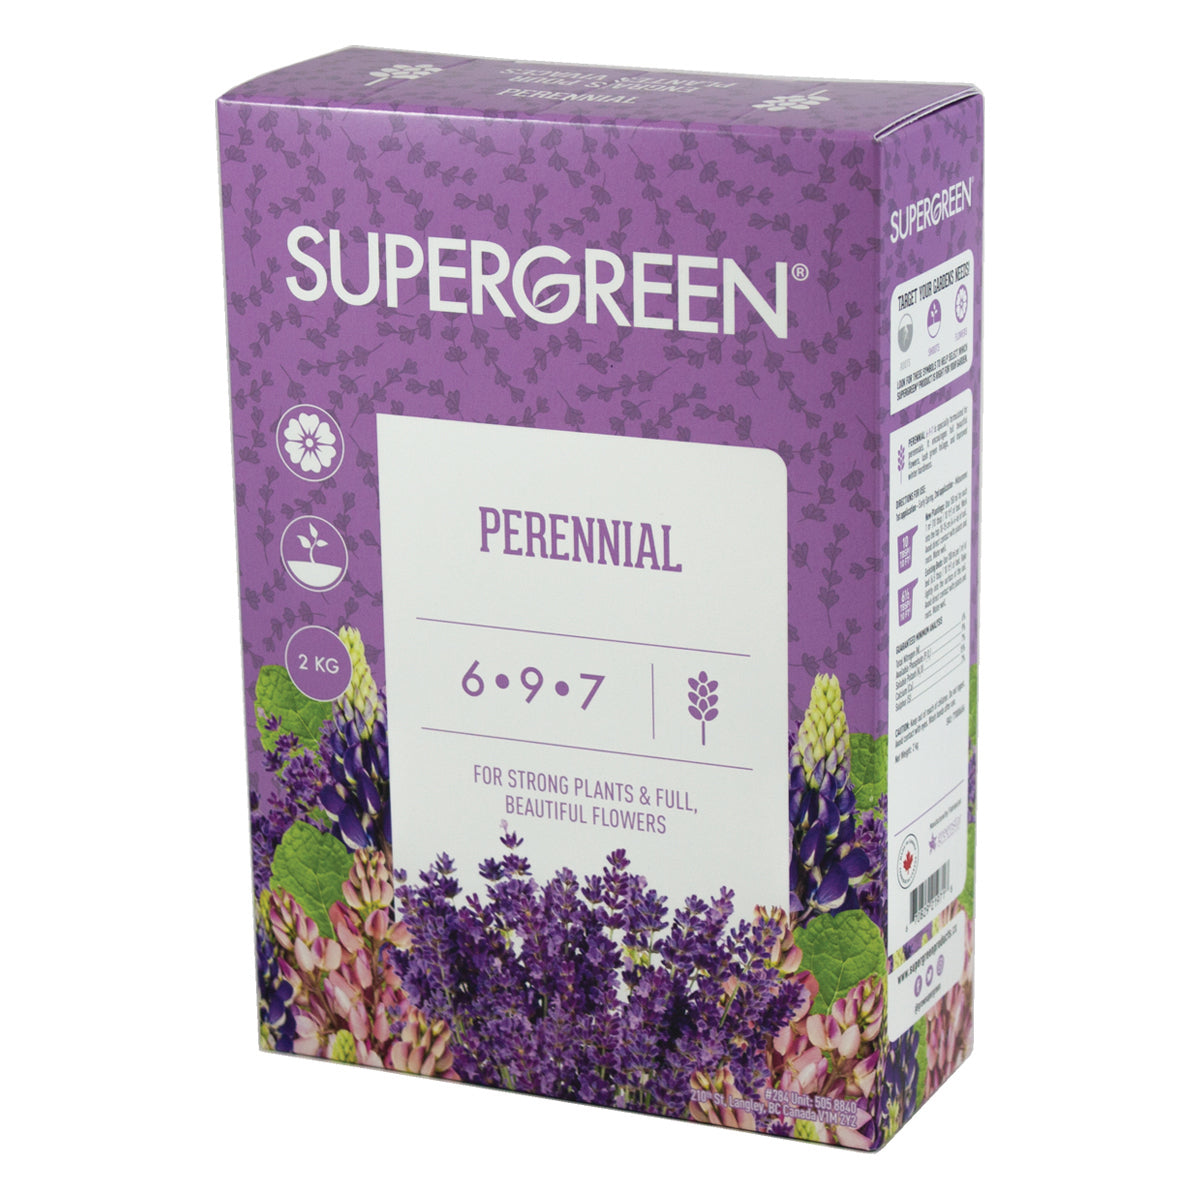 Product Image:Supergreen Perennial 6-9-7 2kg